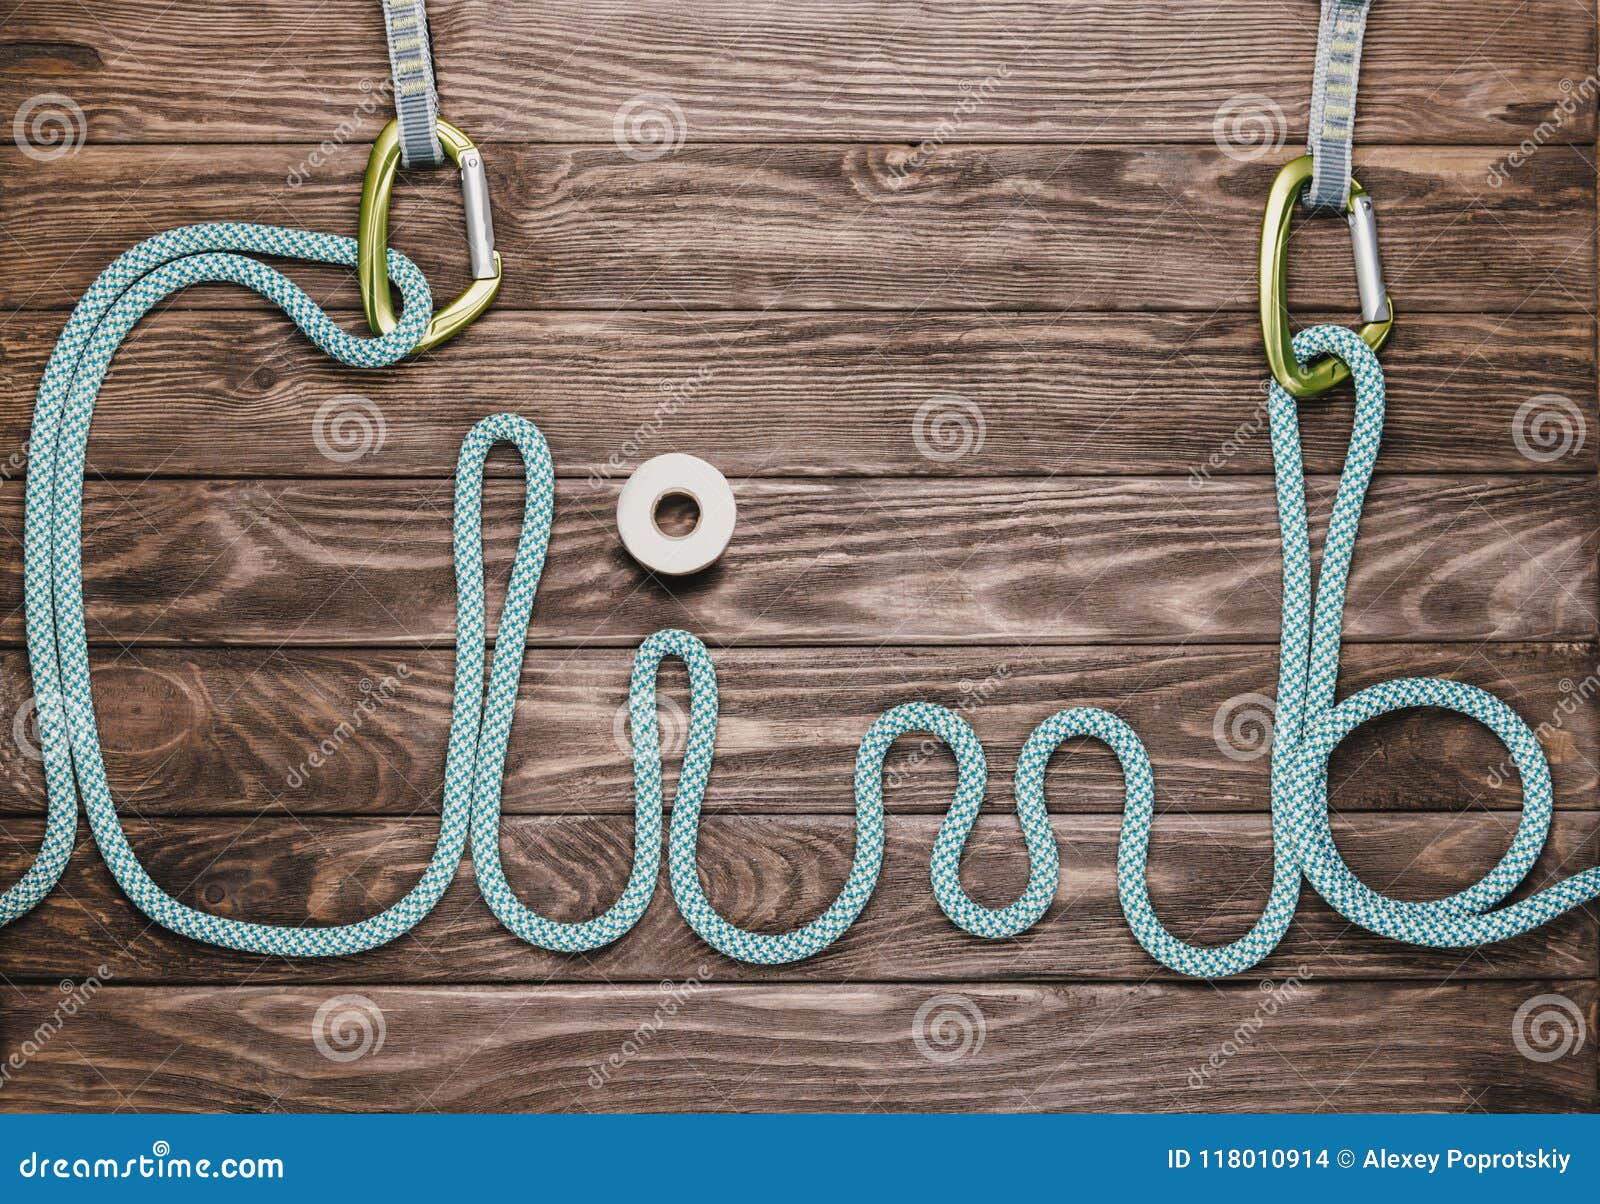 Rope in Shape of Word Climb. Stock Photo - Image of blue, gear